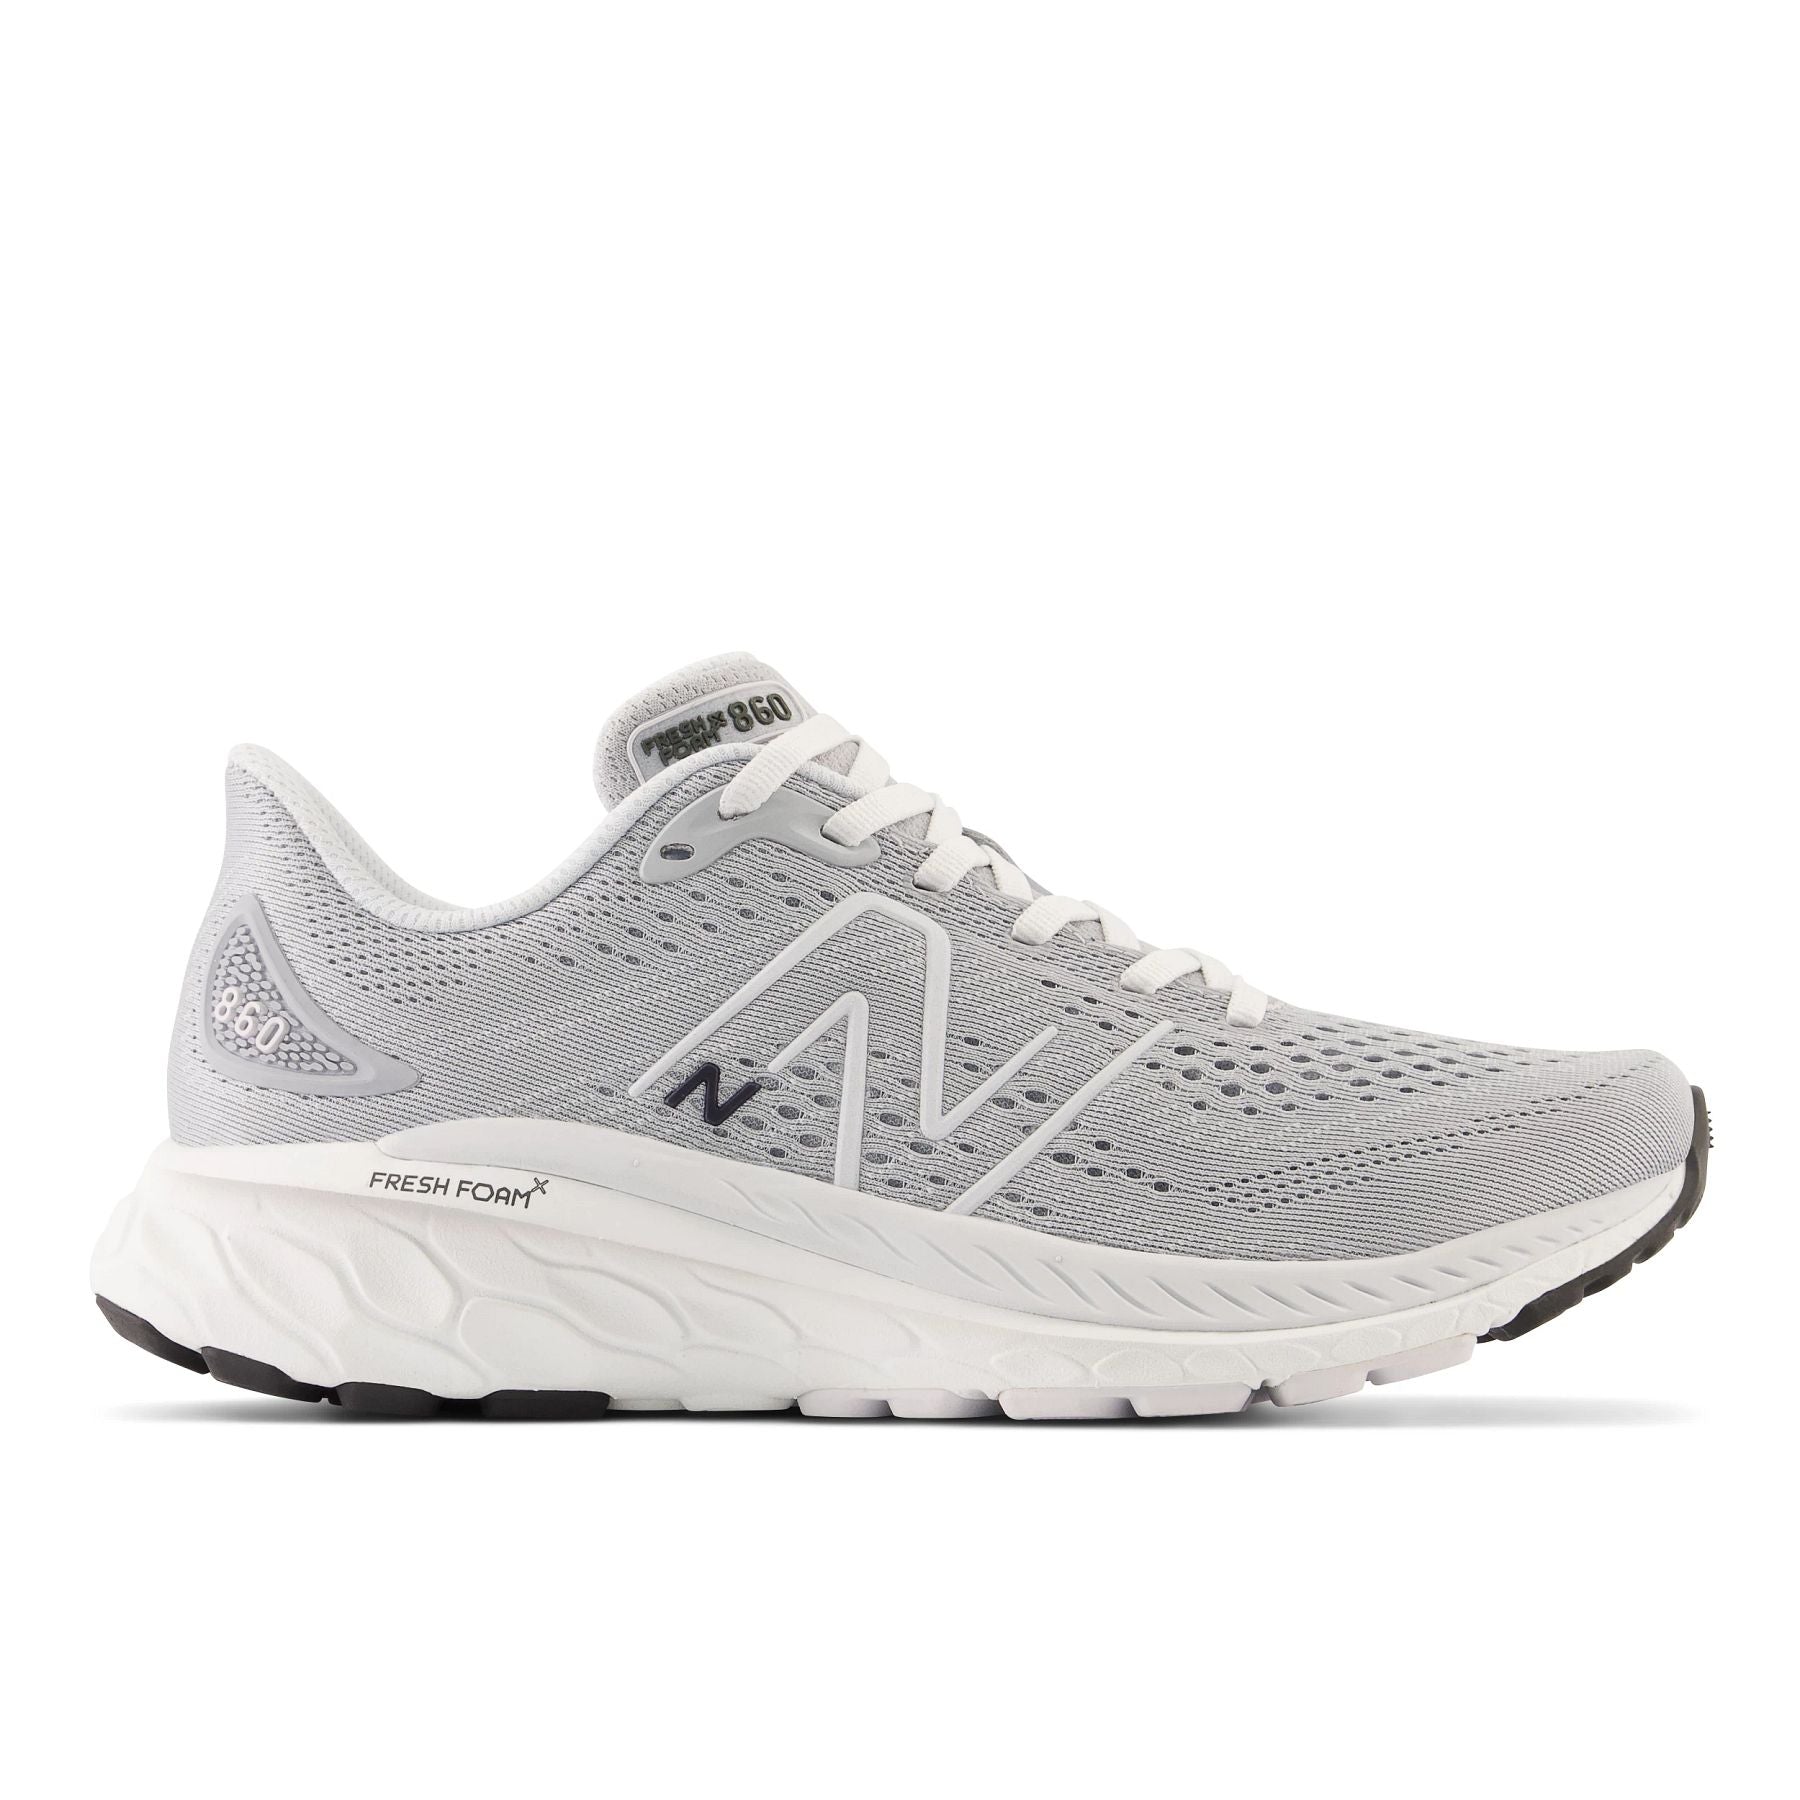 Lateral view of the Women's 860 V13 by New Balance in the color Aluminum